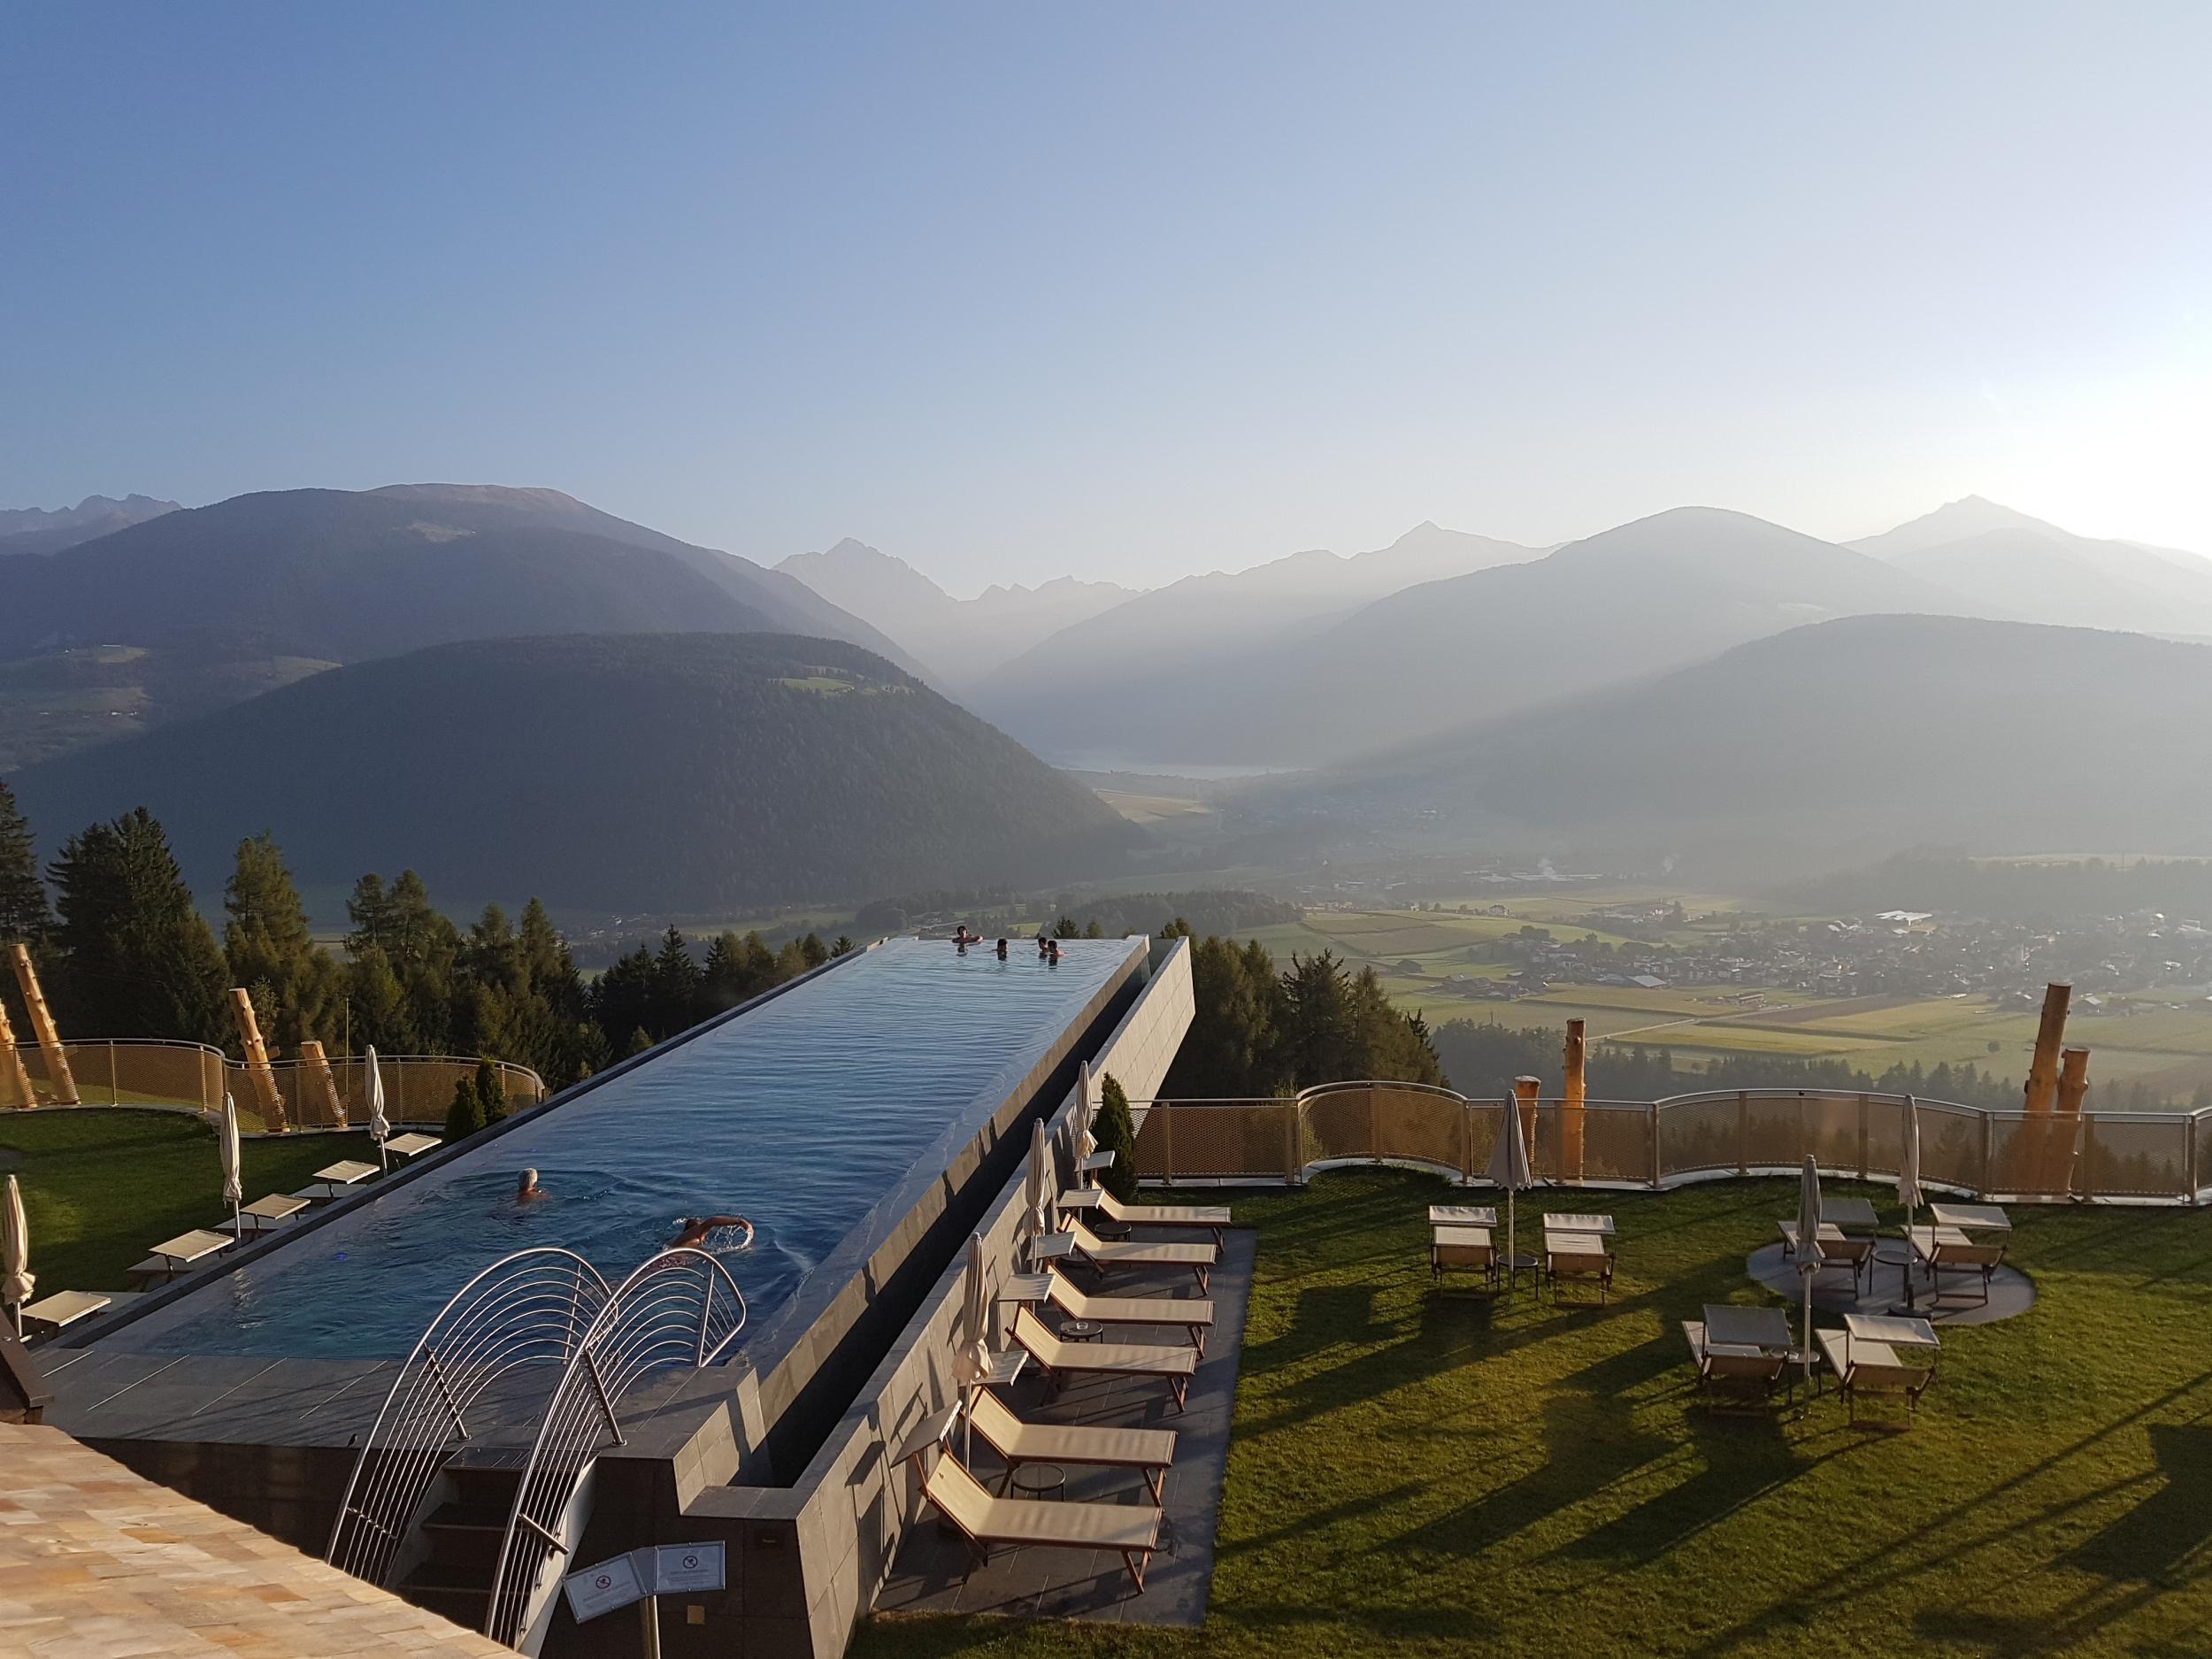 The pool at Hotel Hubertus is cantilevered over the South Tyrol landscape